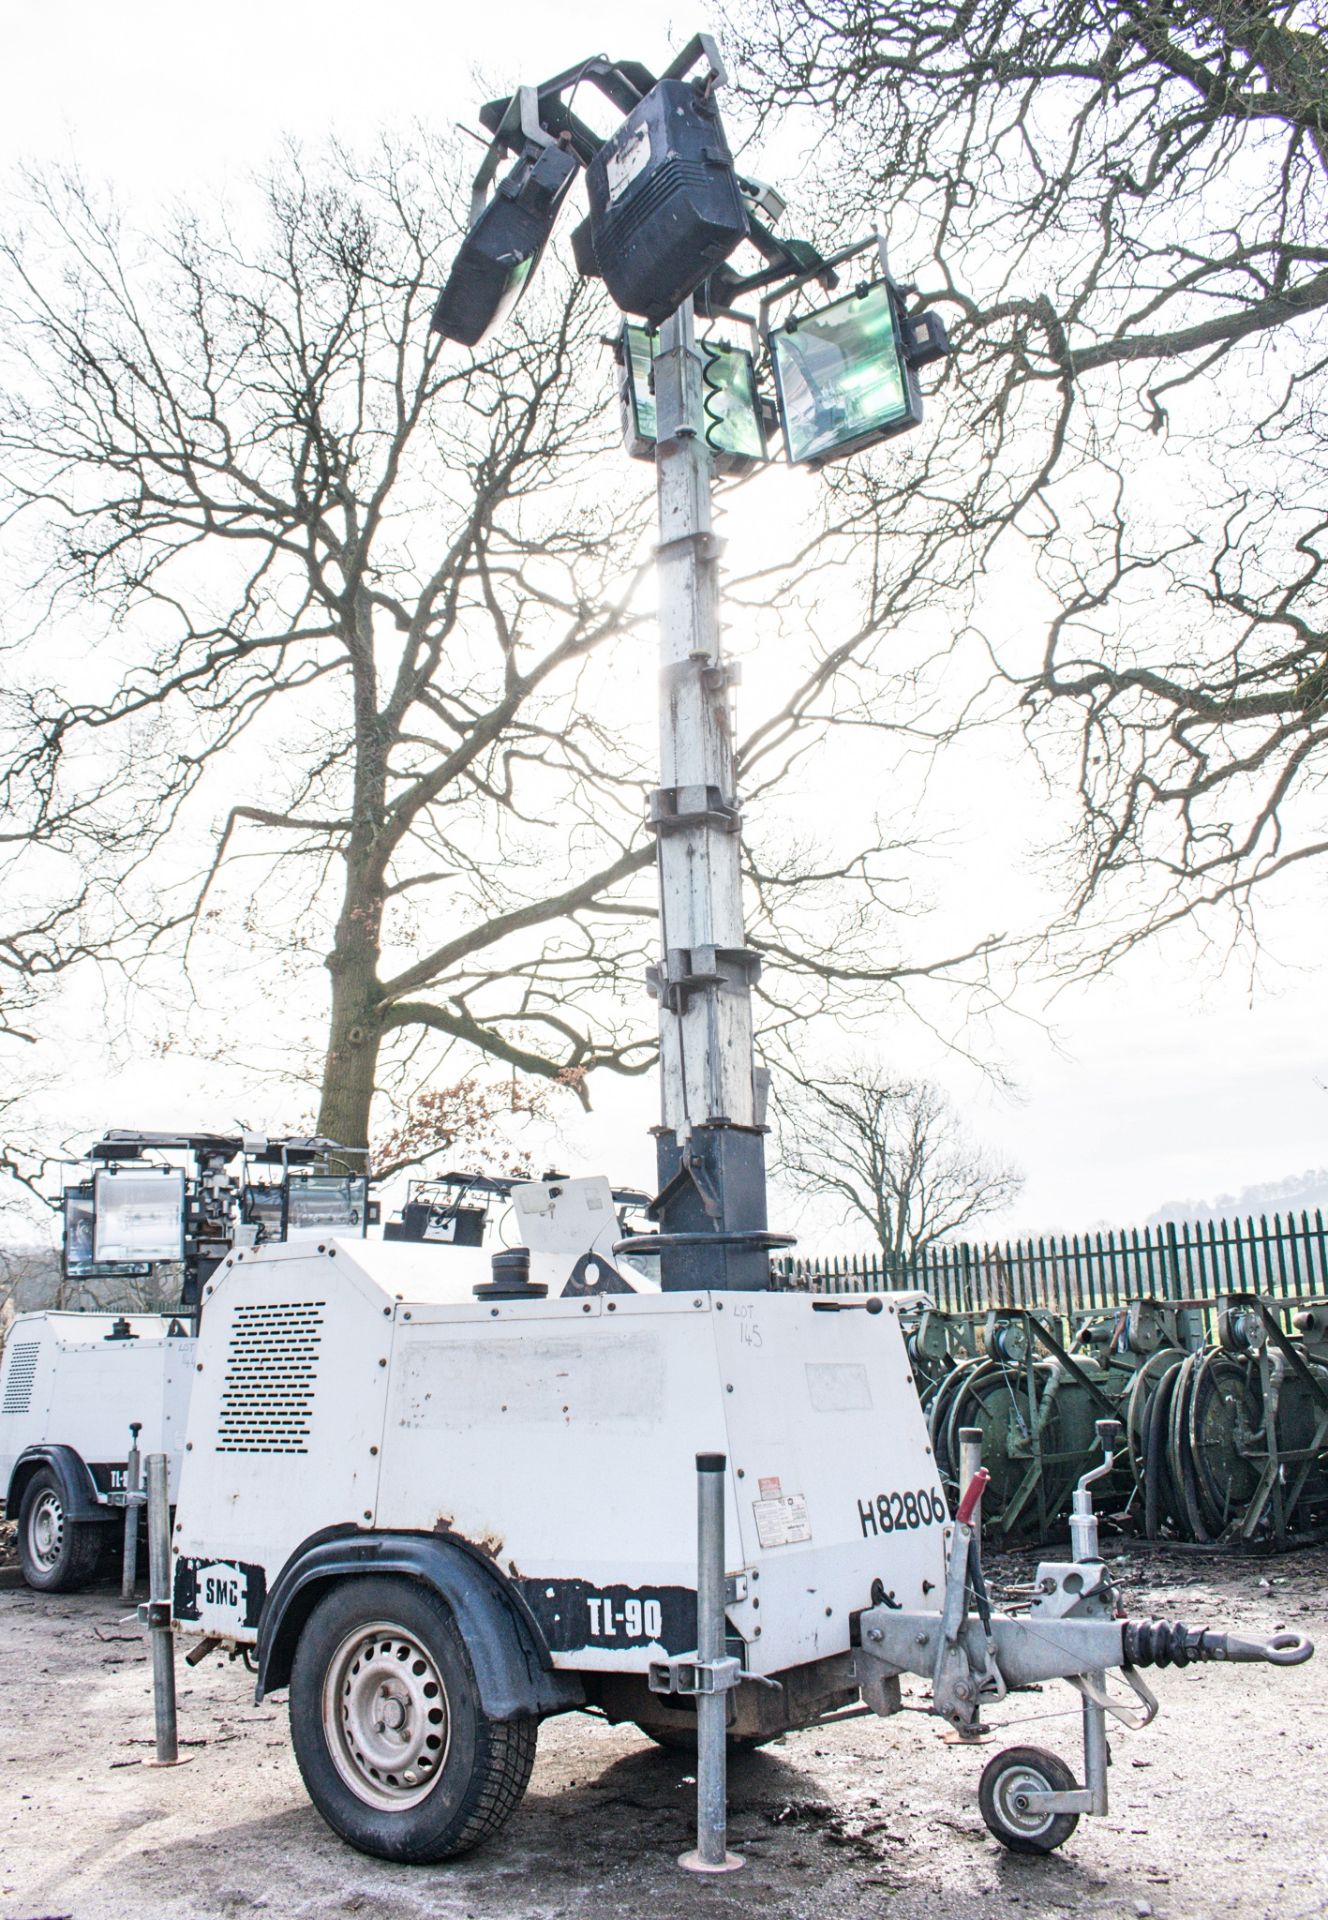 SMC TL-90 diesel driven mobile lighting tower Year: 2008 S/N: 87891 Recorded Hours: H82806 - Image 5 of 9